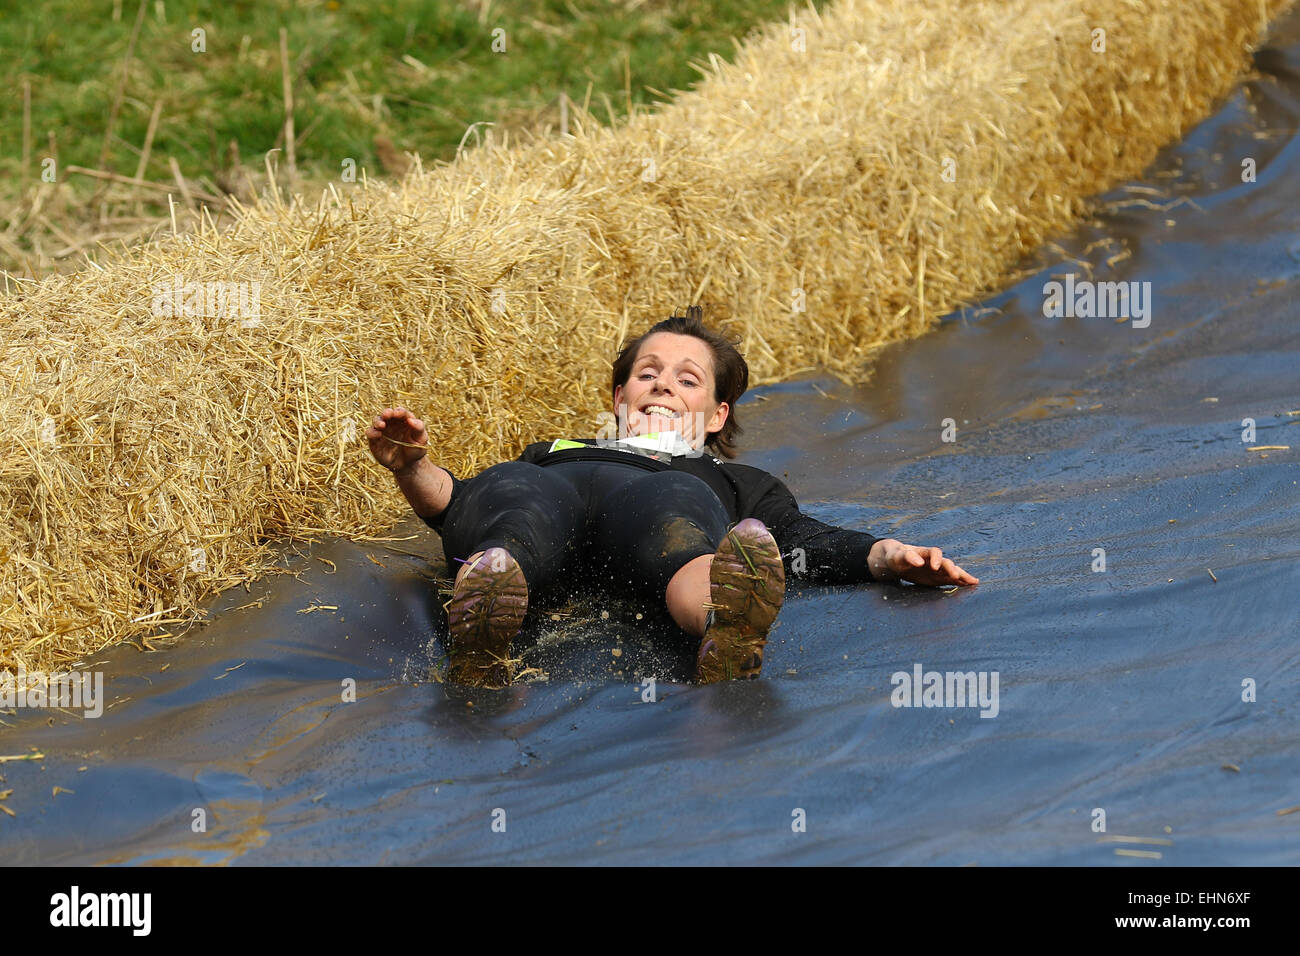 Competitors taking part in the Battle of Lansdown Obstacle Course race. Stock Photo